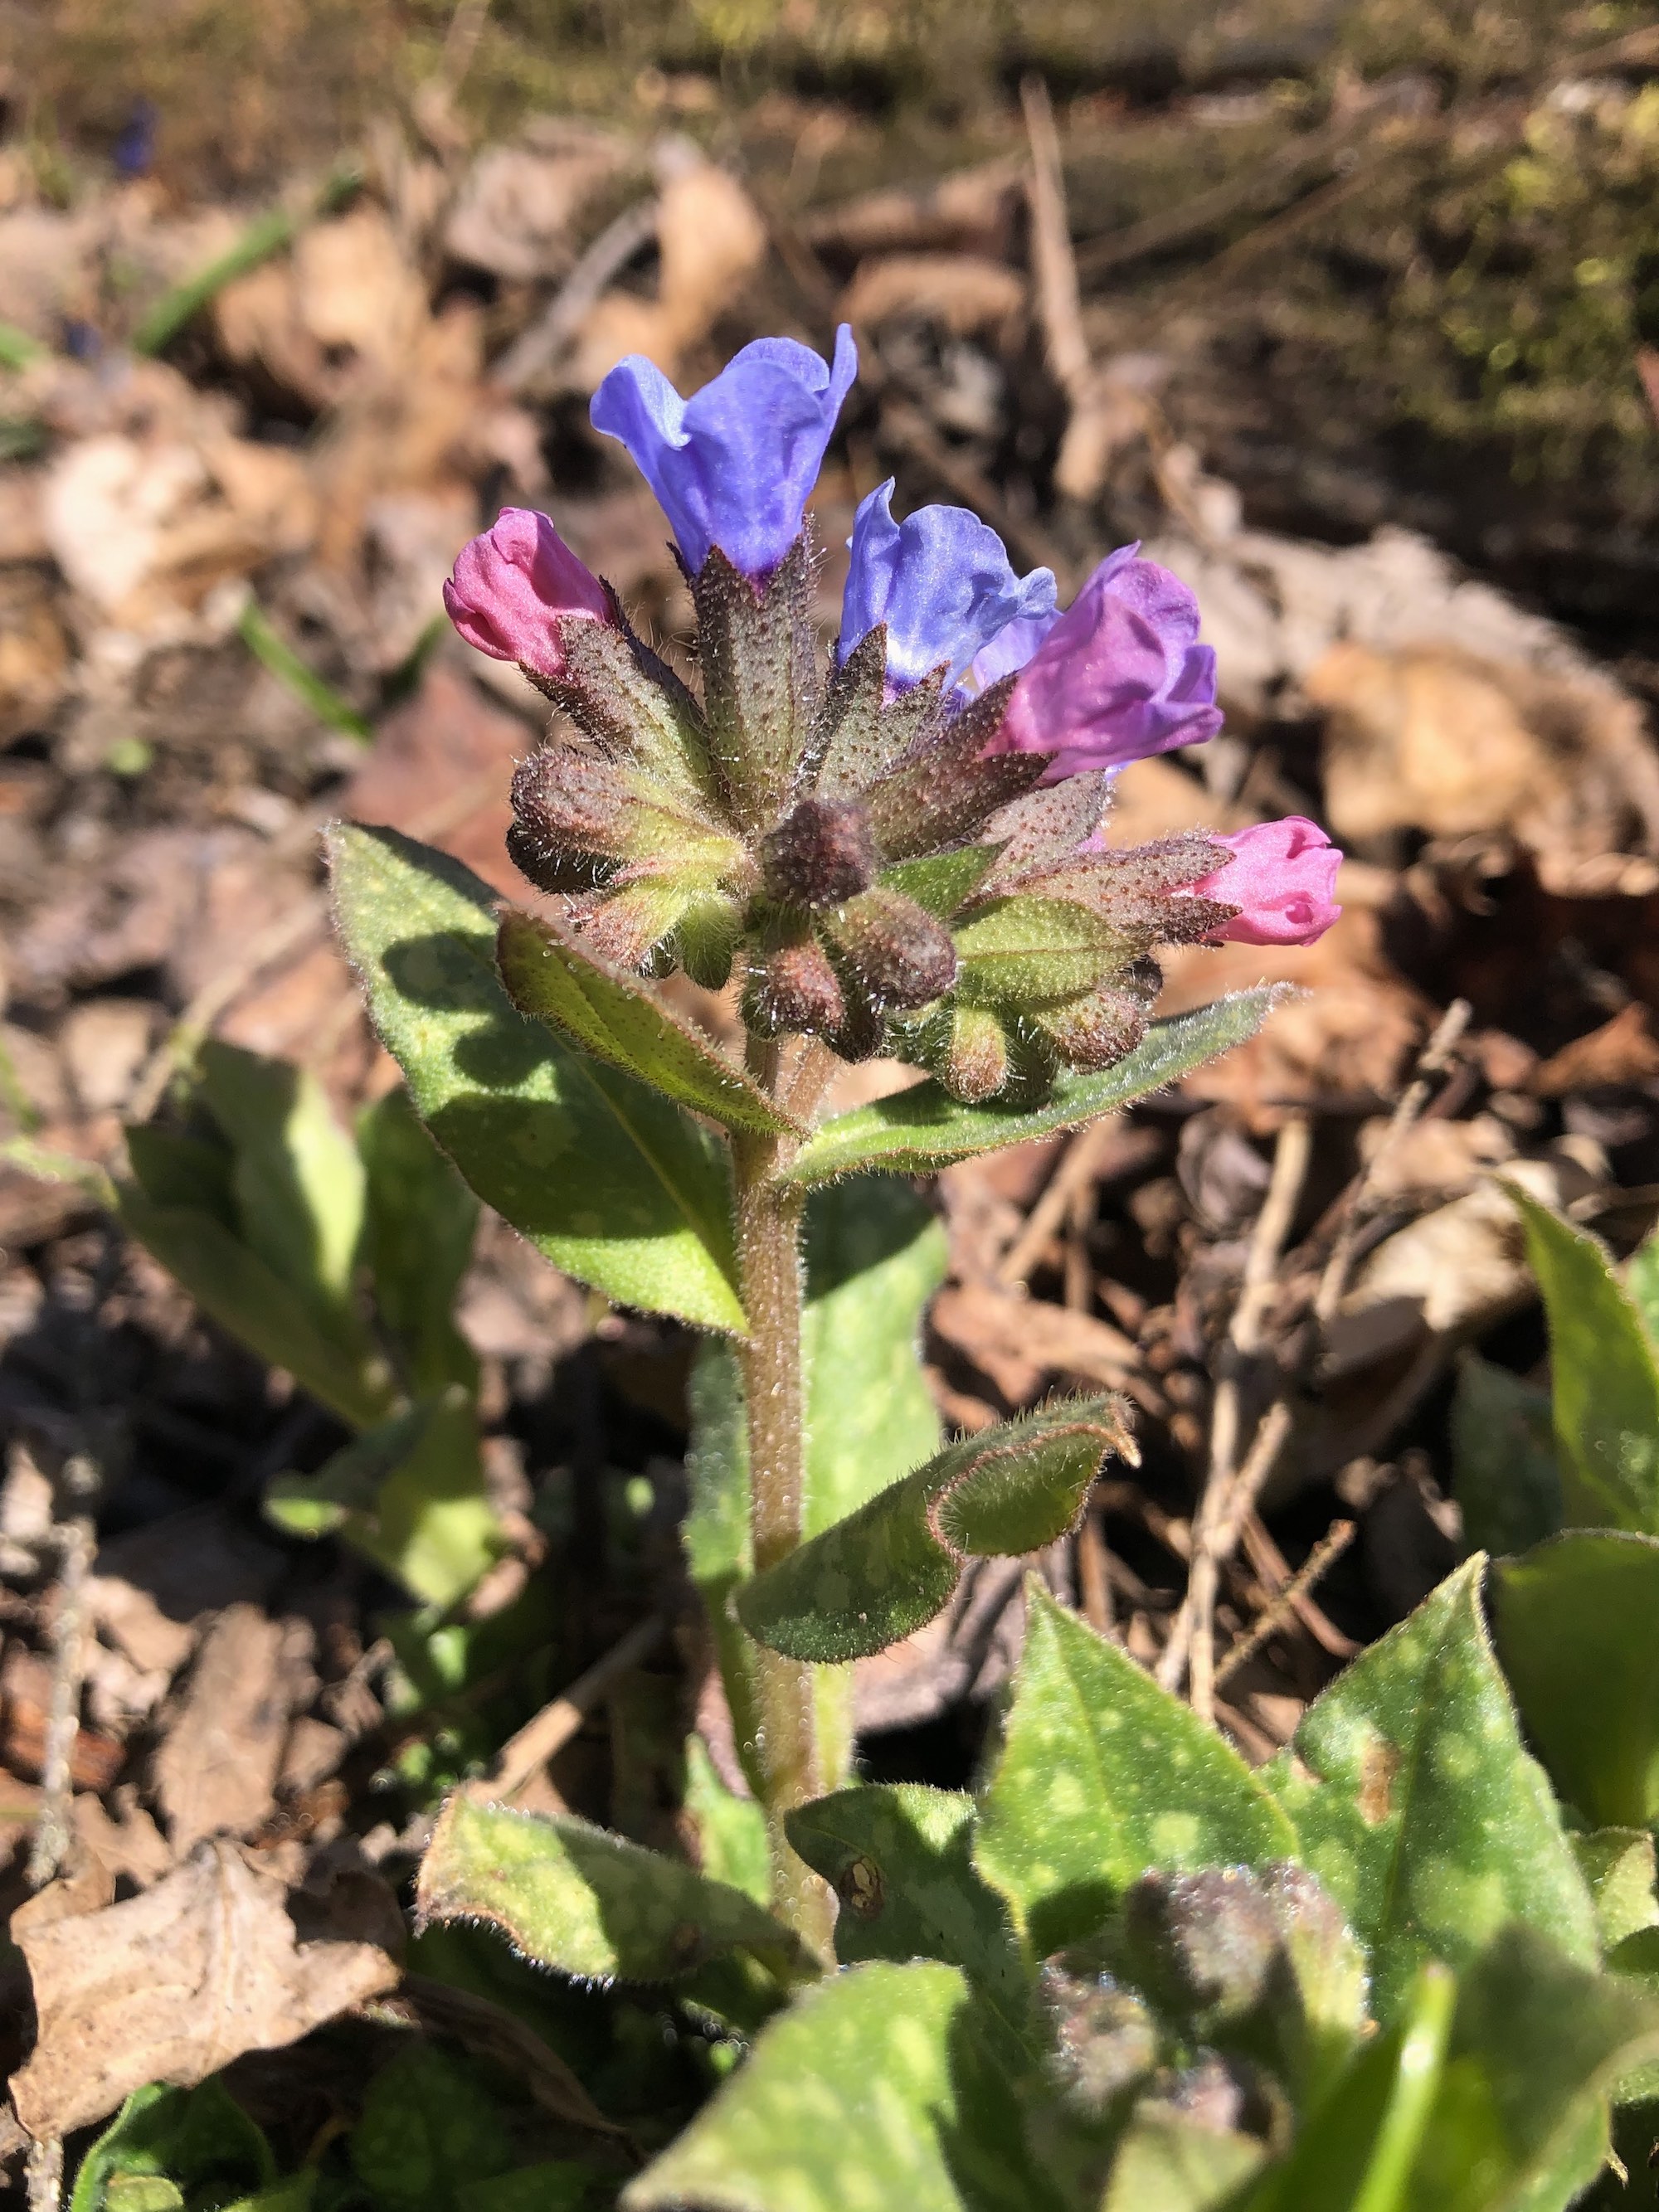 Lungwort near Agawa Path in Nakoma in Madison, Wisconsin on April 1, 2021.